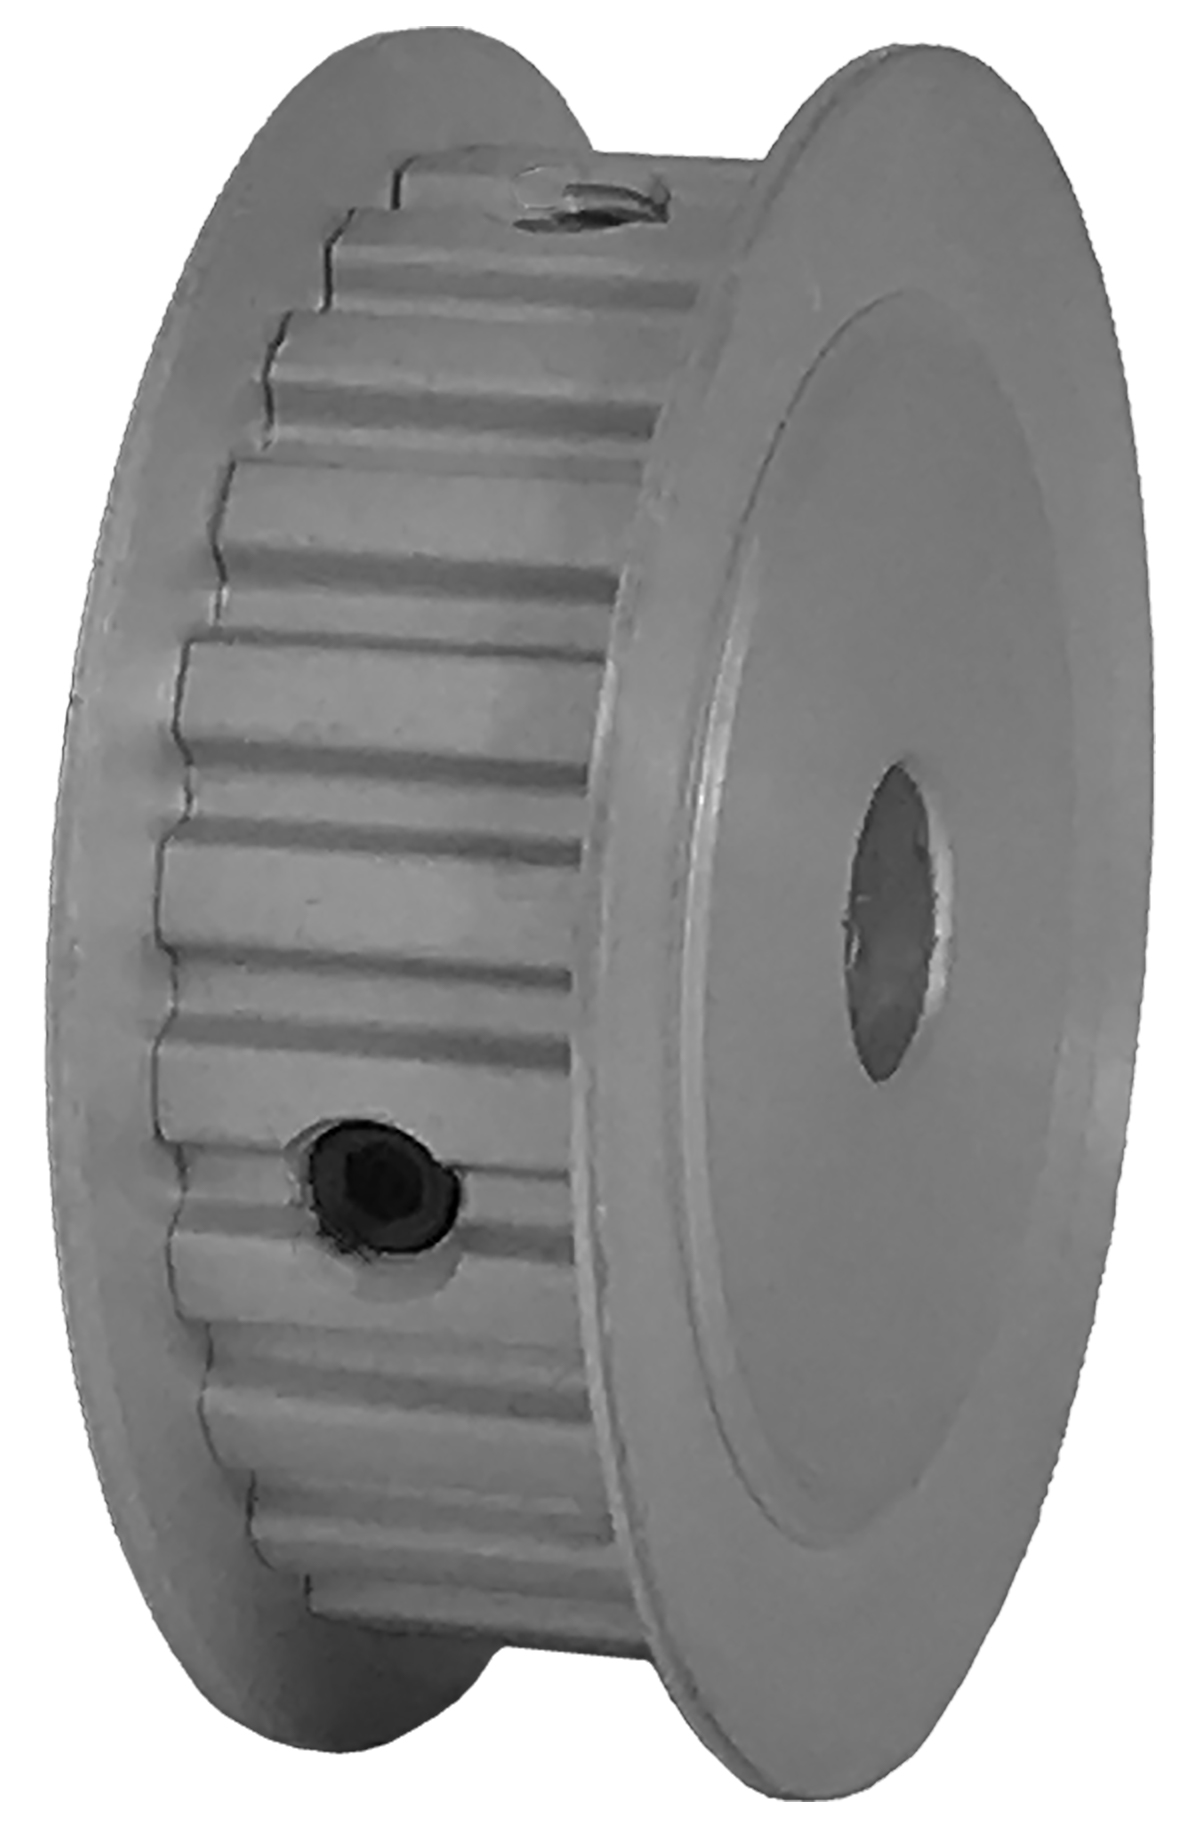 24XL037-3FA4 - Aluminum Imperial Pitch Pulleys